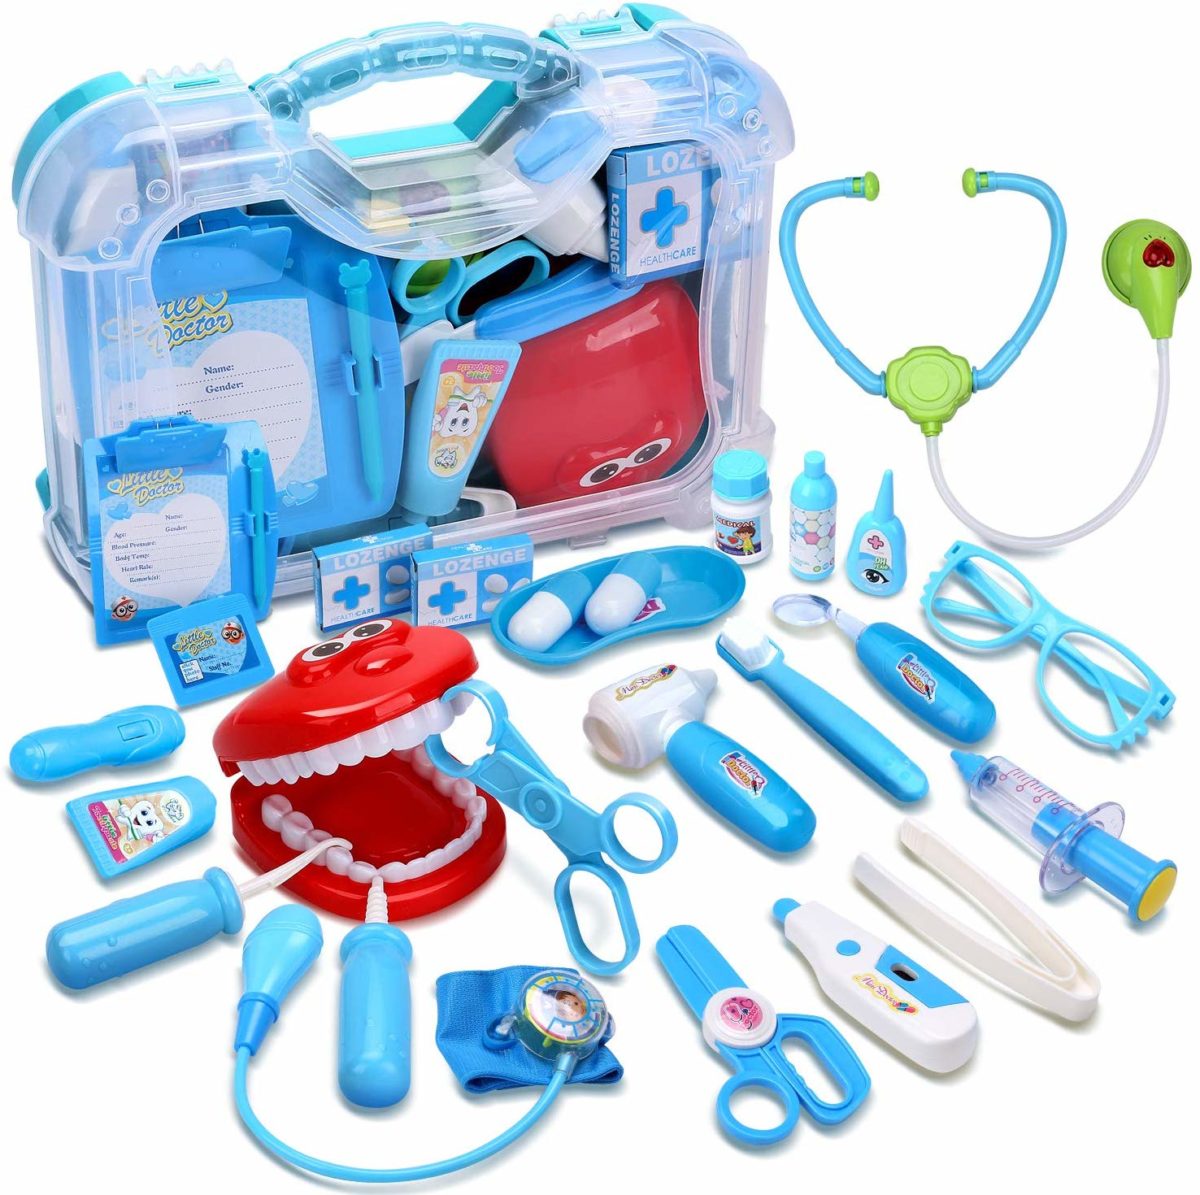 Cute Stone Toy Medical Kit - Top Toys and Gifts for Four Year Old Boys 1